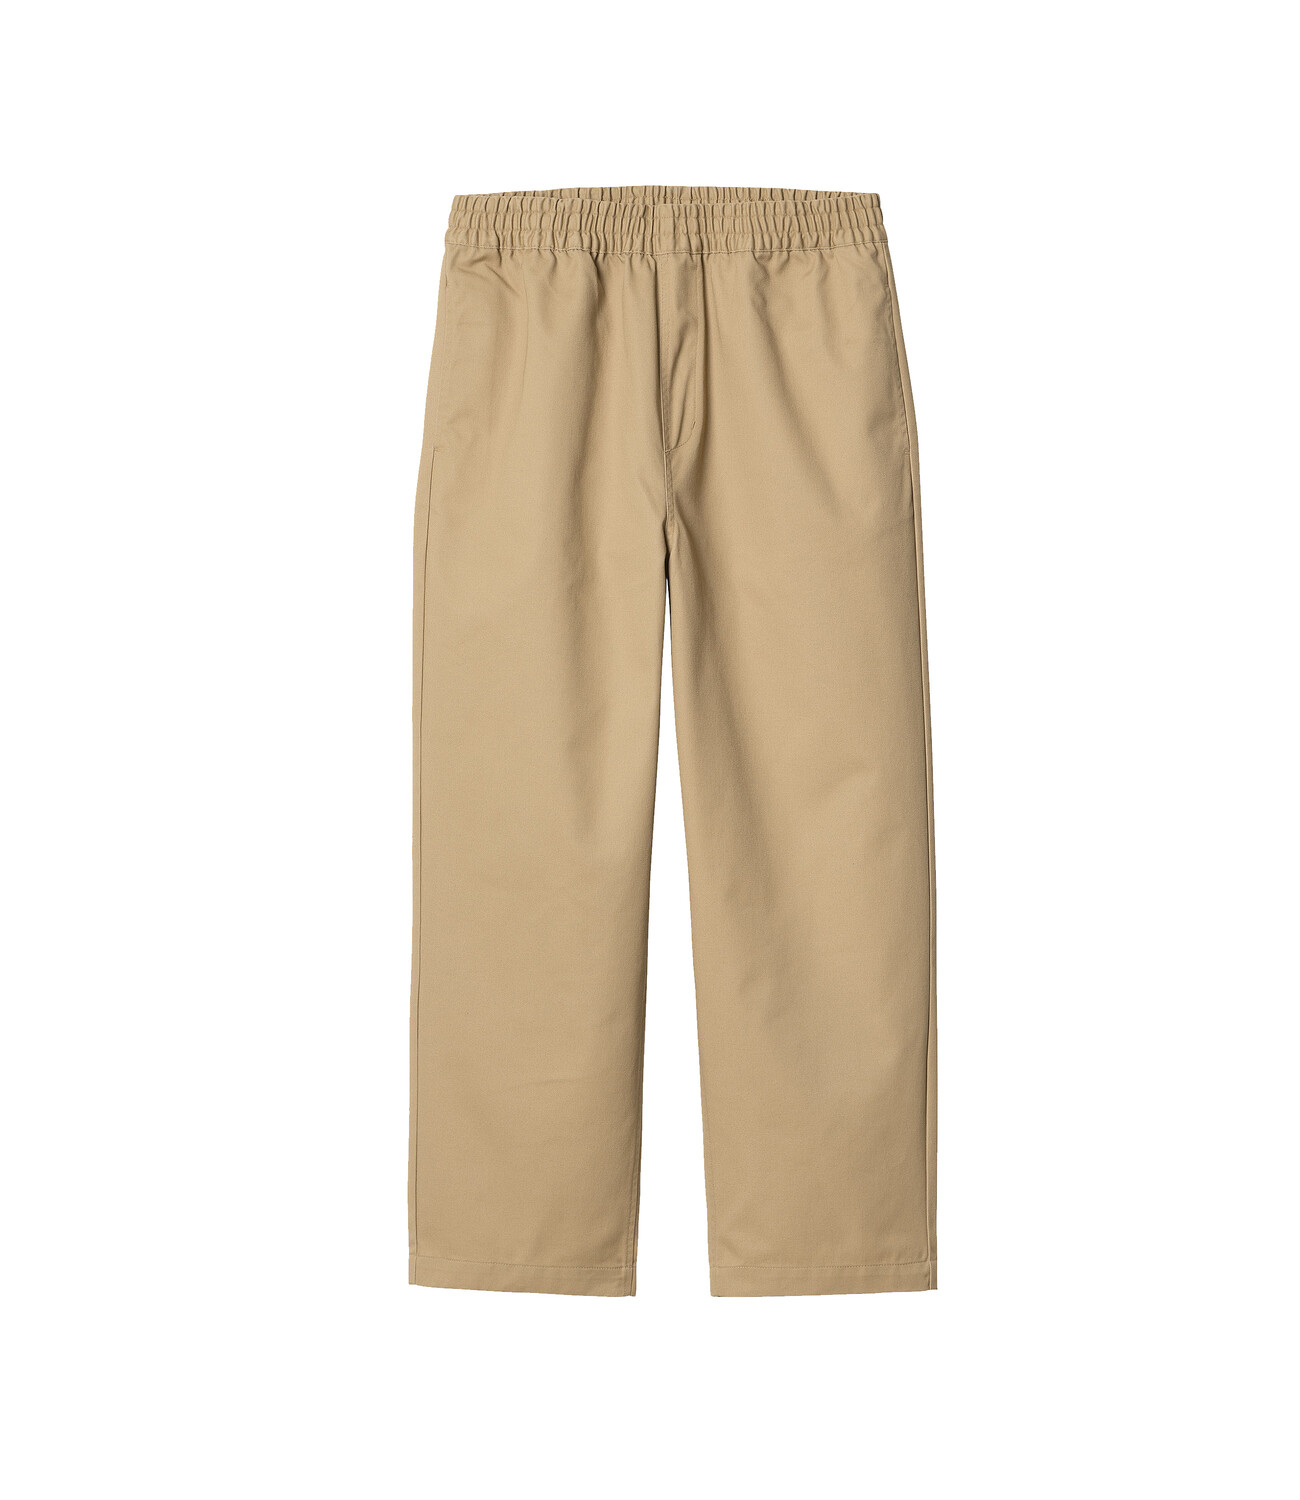 Newhaven pant - Sable rinsed